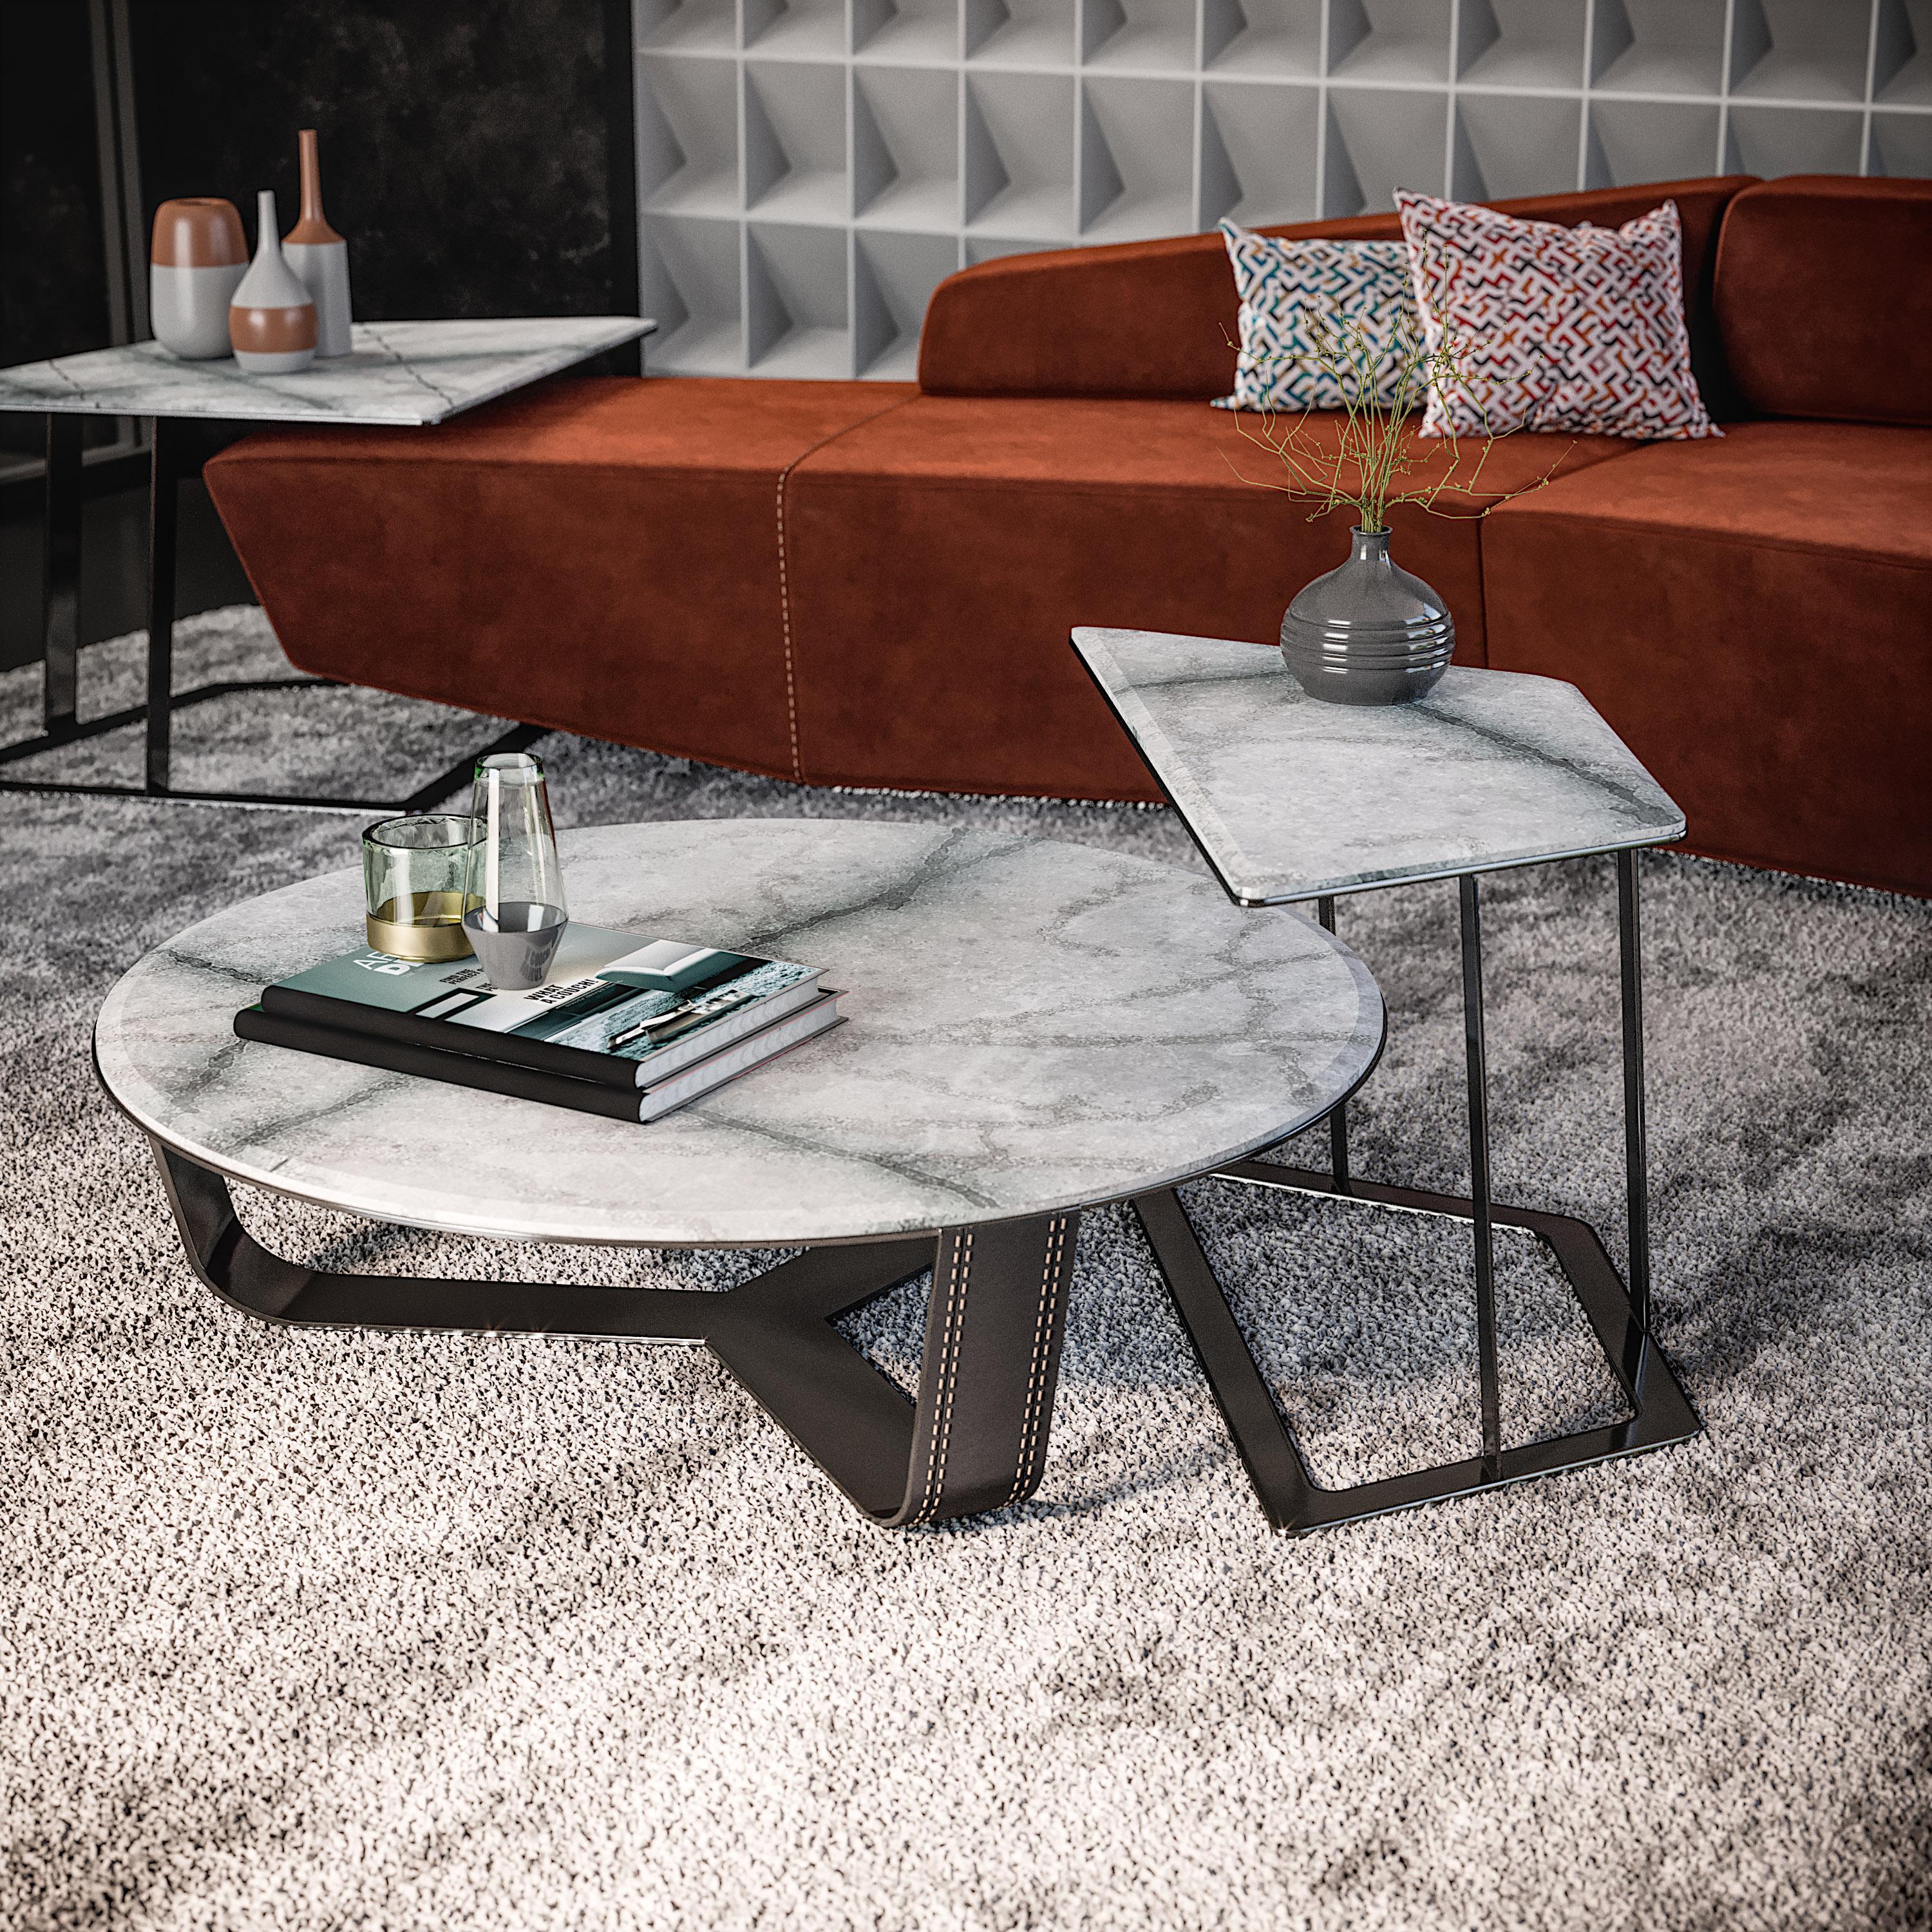 Modern Contemporary coffee table, Marble Top, Metal frame legs with leather insert. For Sale